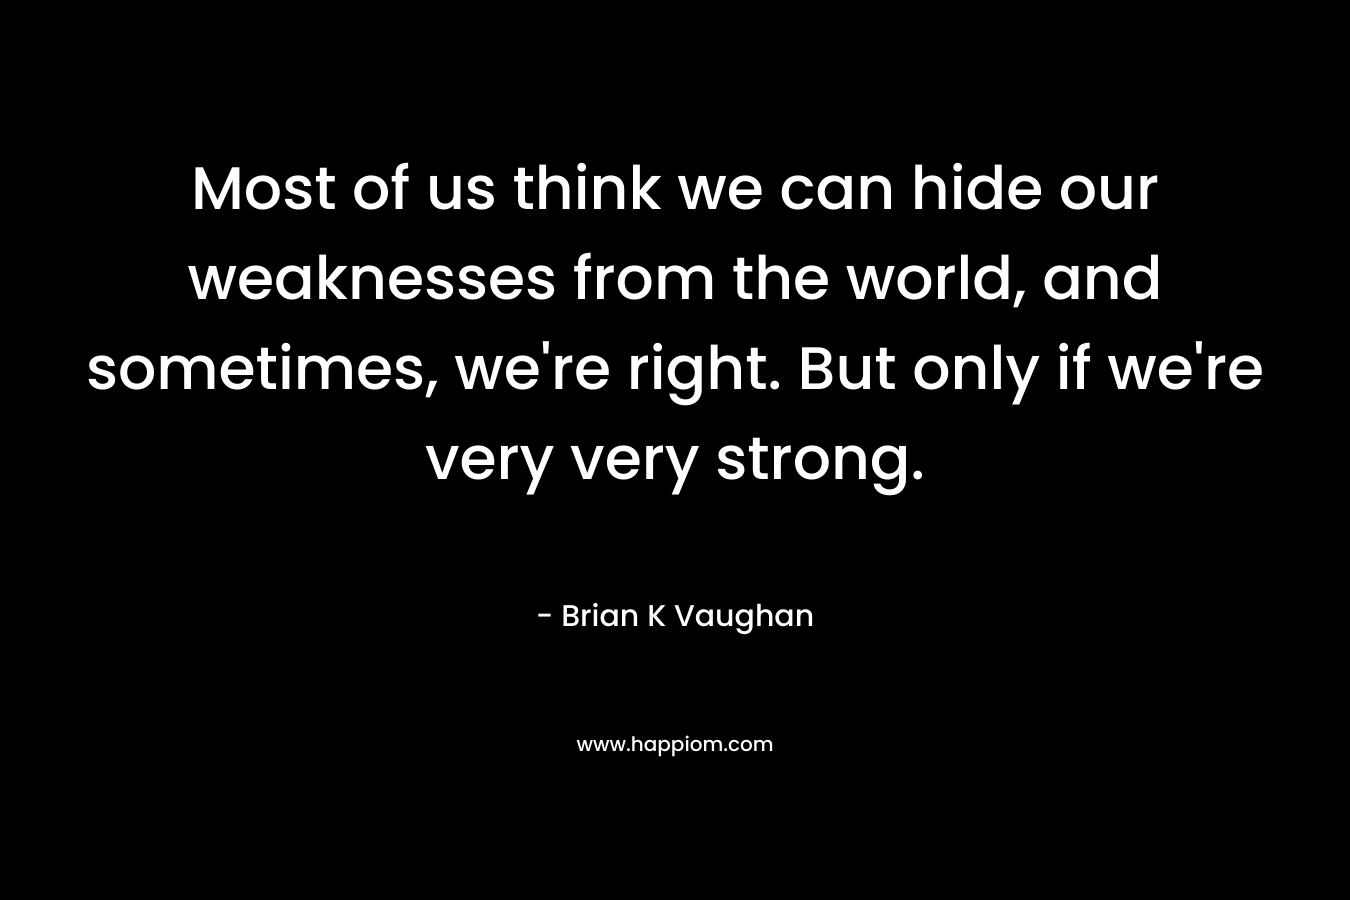 Most of us think we can hide our weaknesses from the world, and sometimes, we're right. But only if we're very very strong.